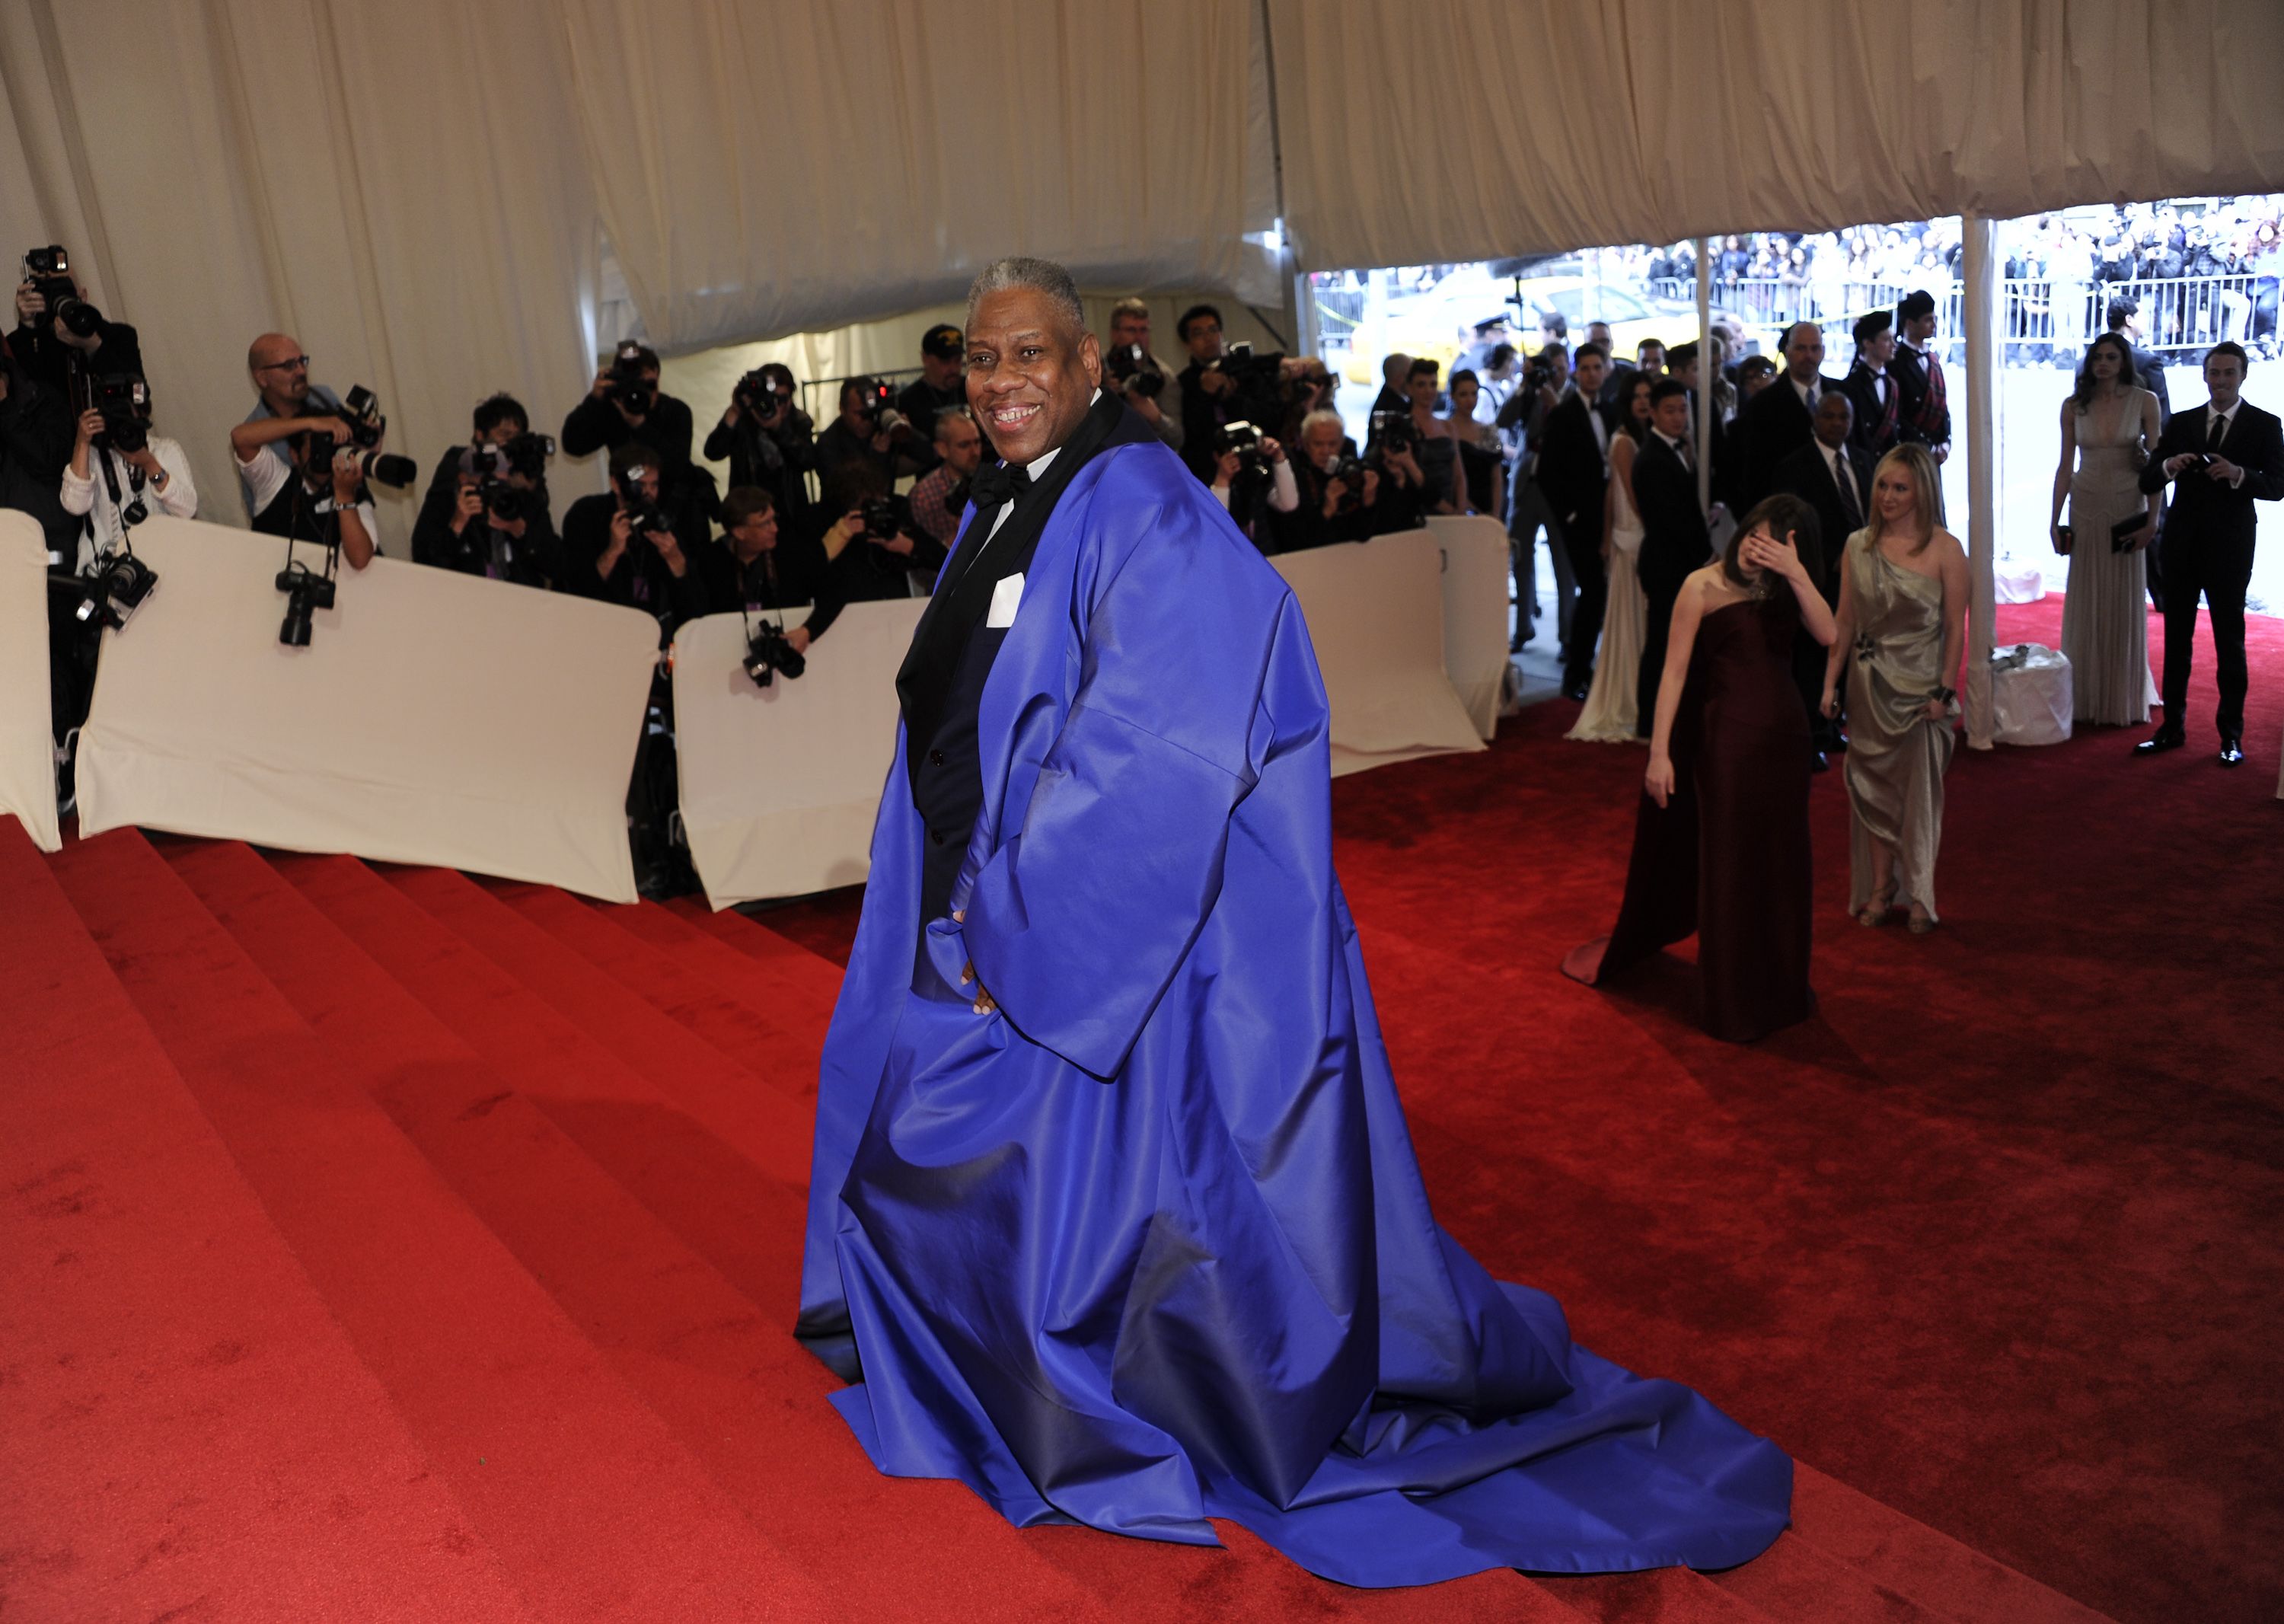 Pioneering fashion journalist André Leon Talley dies at 73 - WTOP News